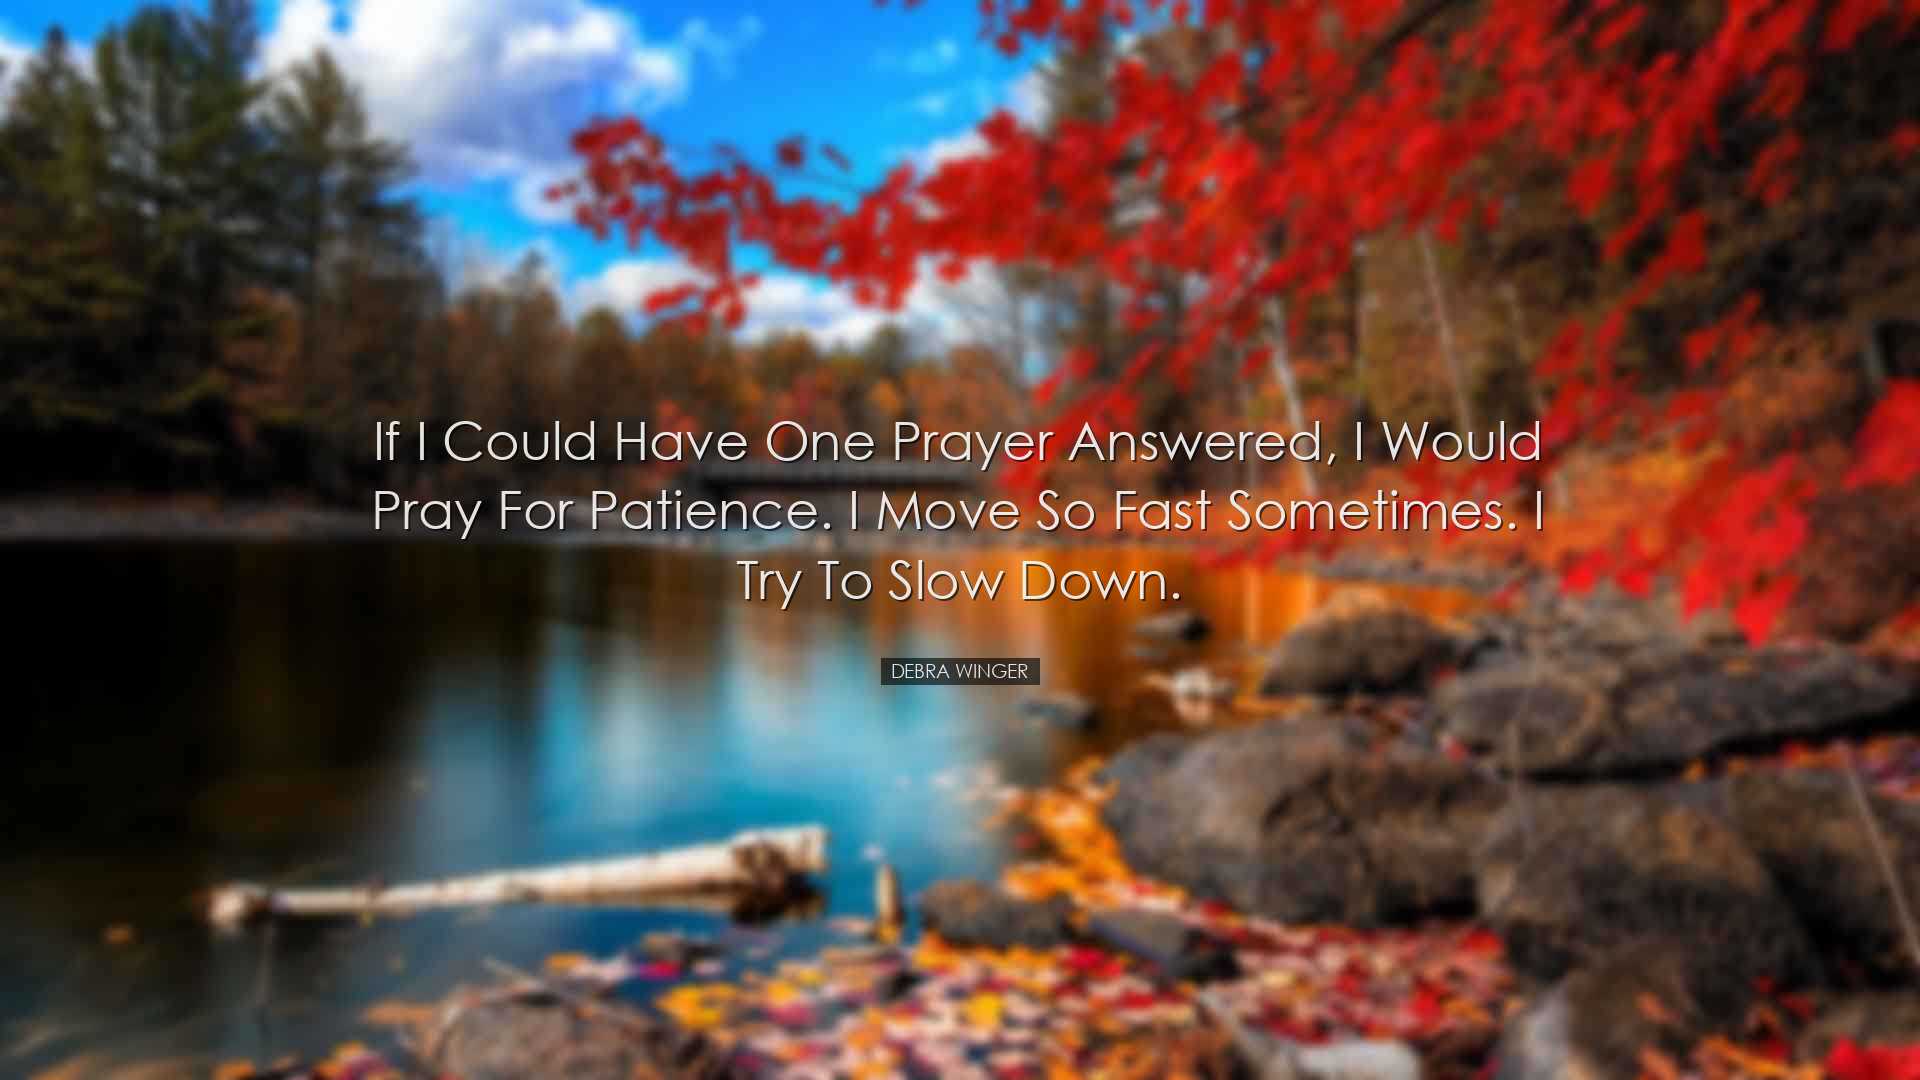 If I could have one prayer answered, I would pray for patience. I